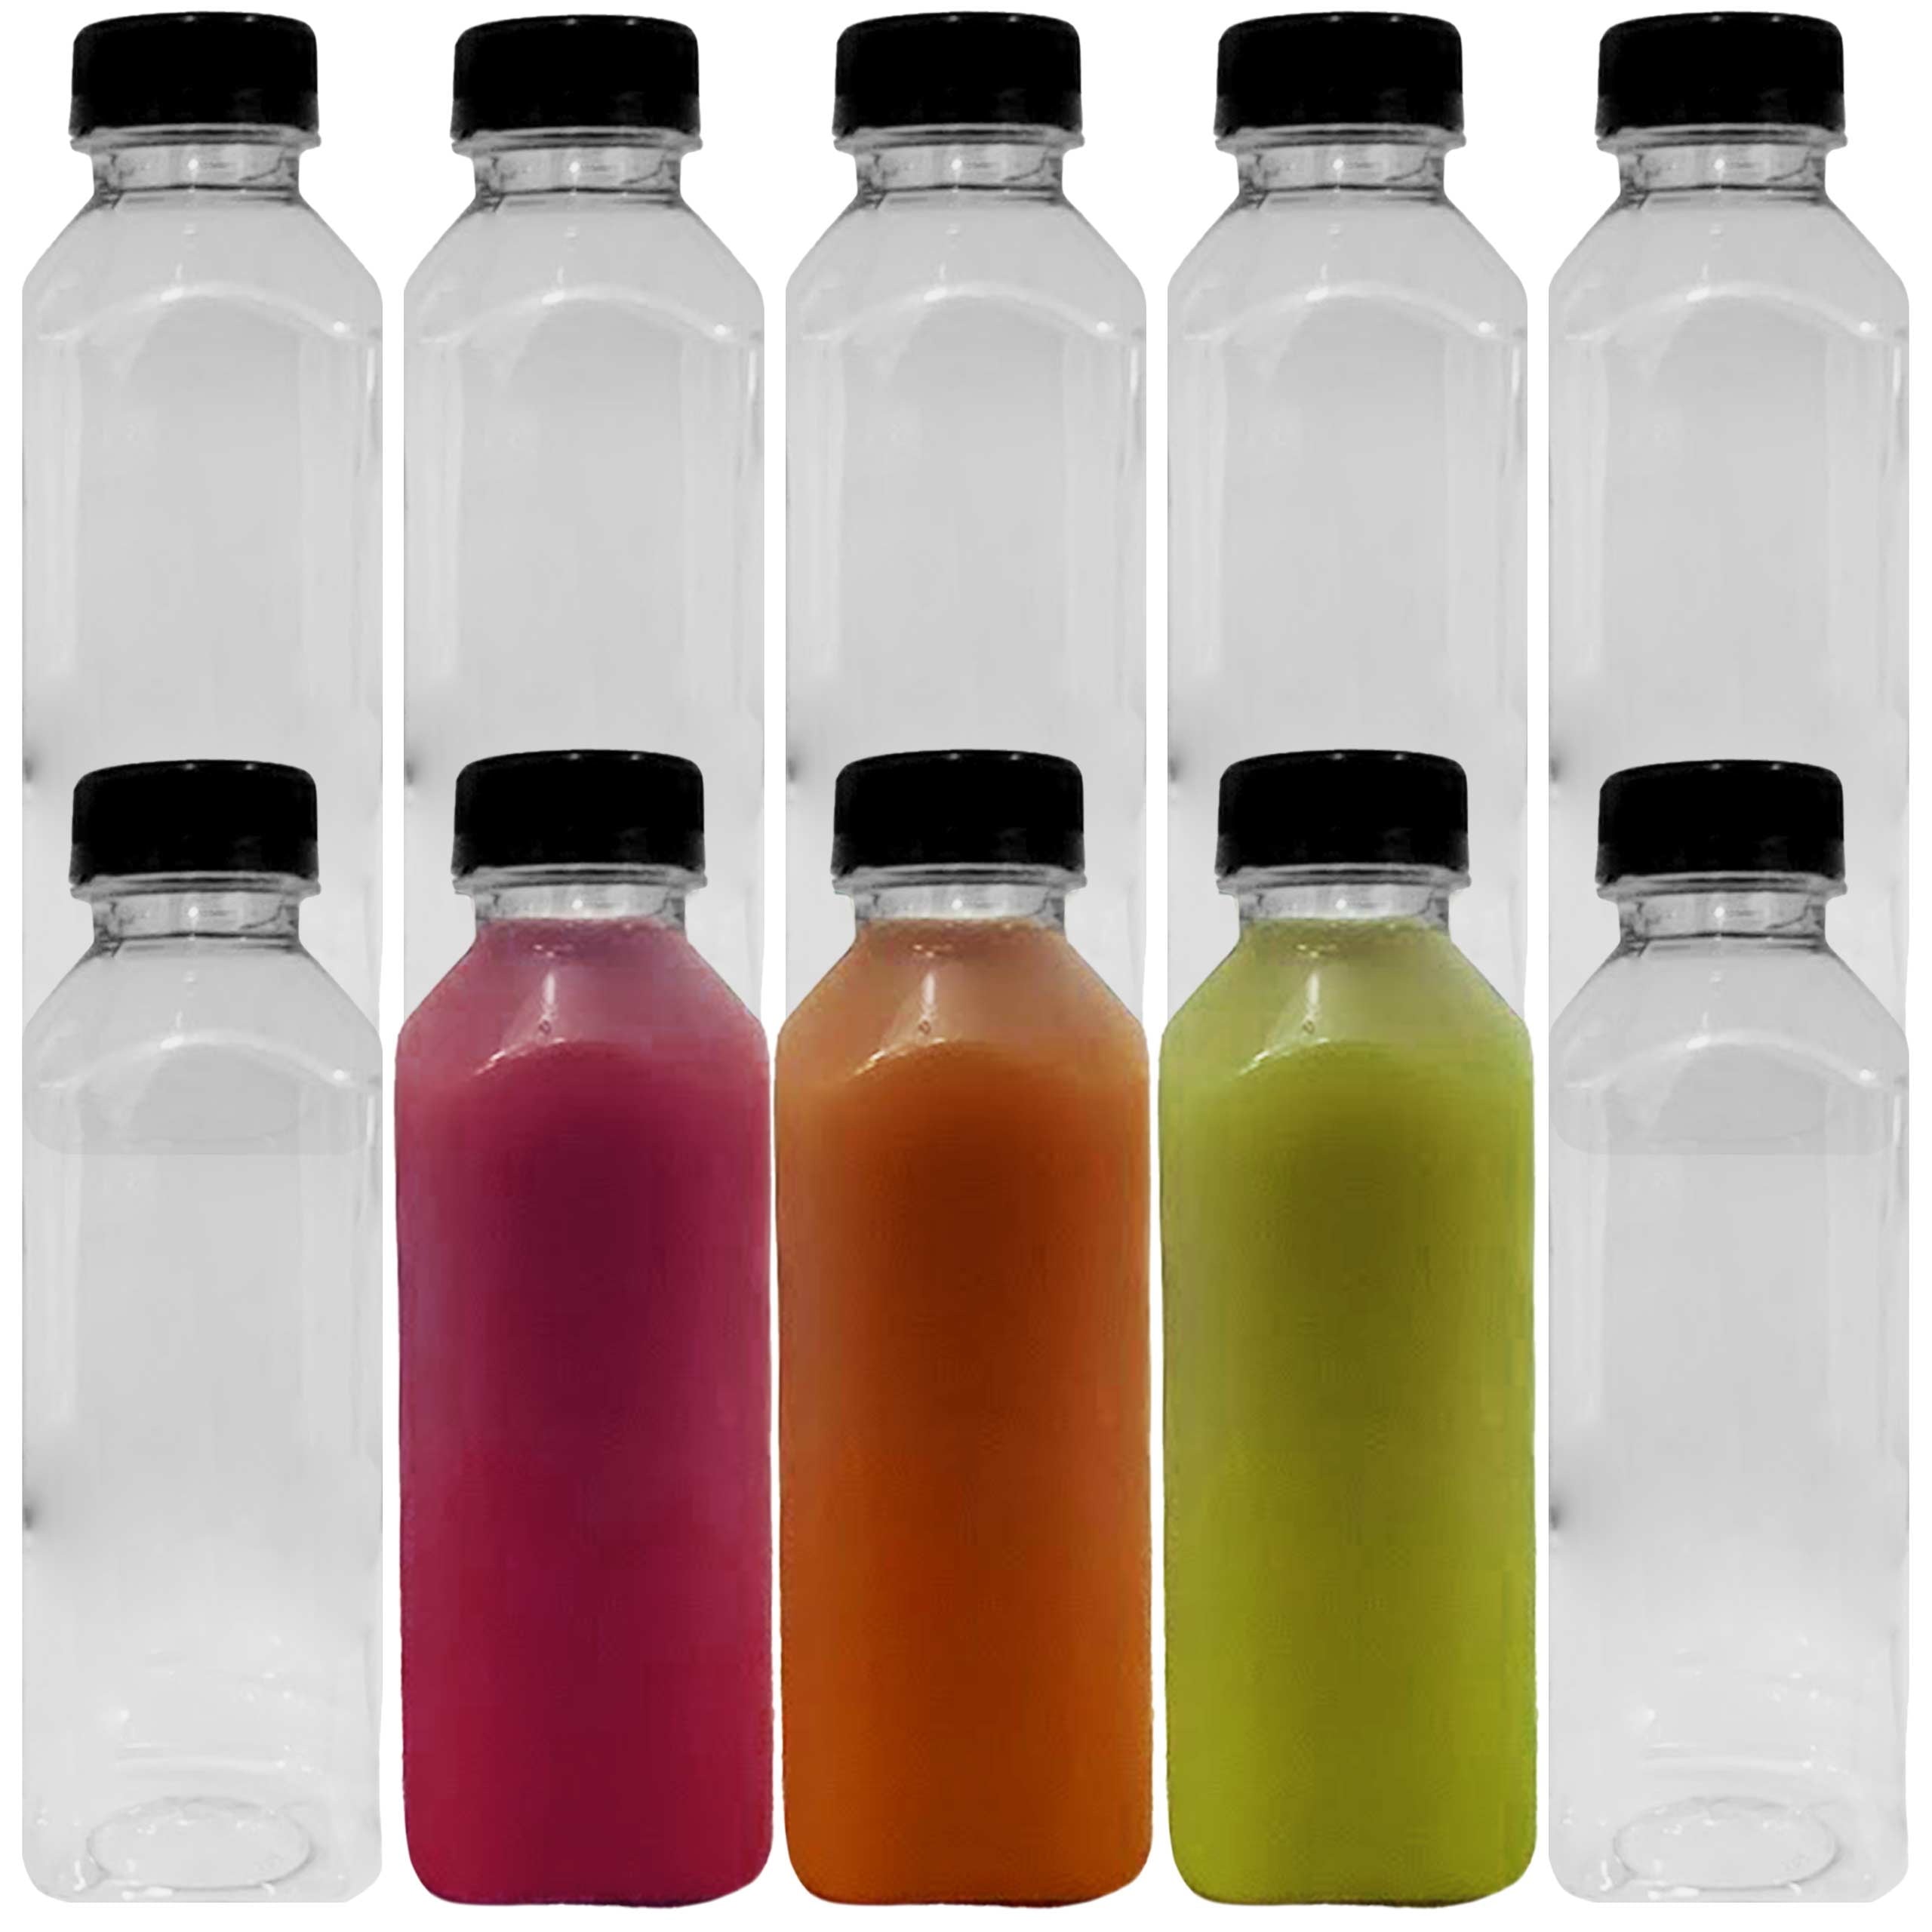 Plastic Juice Bottles With ,, Reusable Water Bottles With Lids For